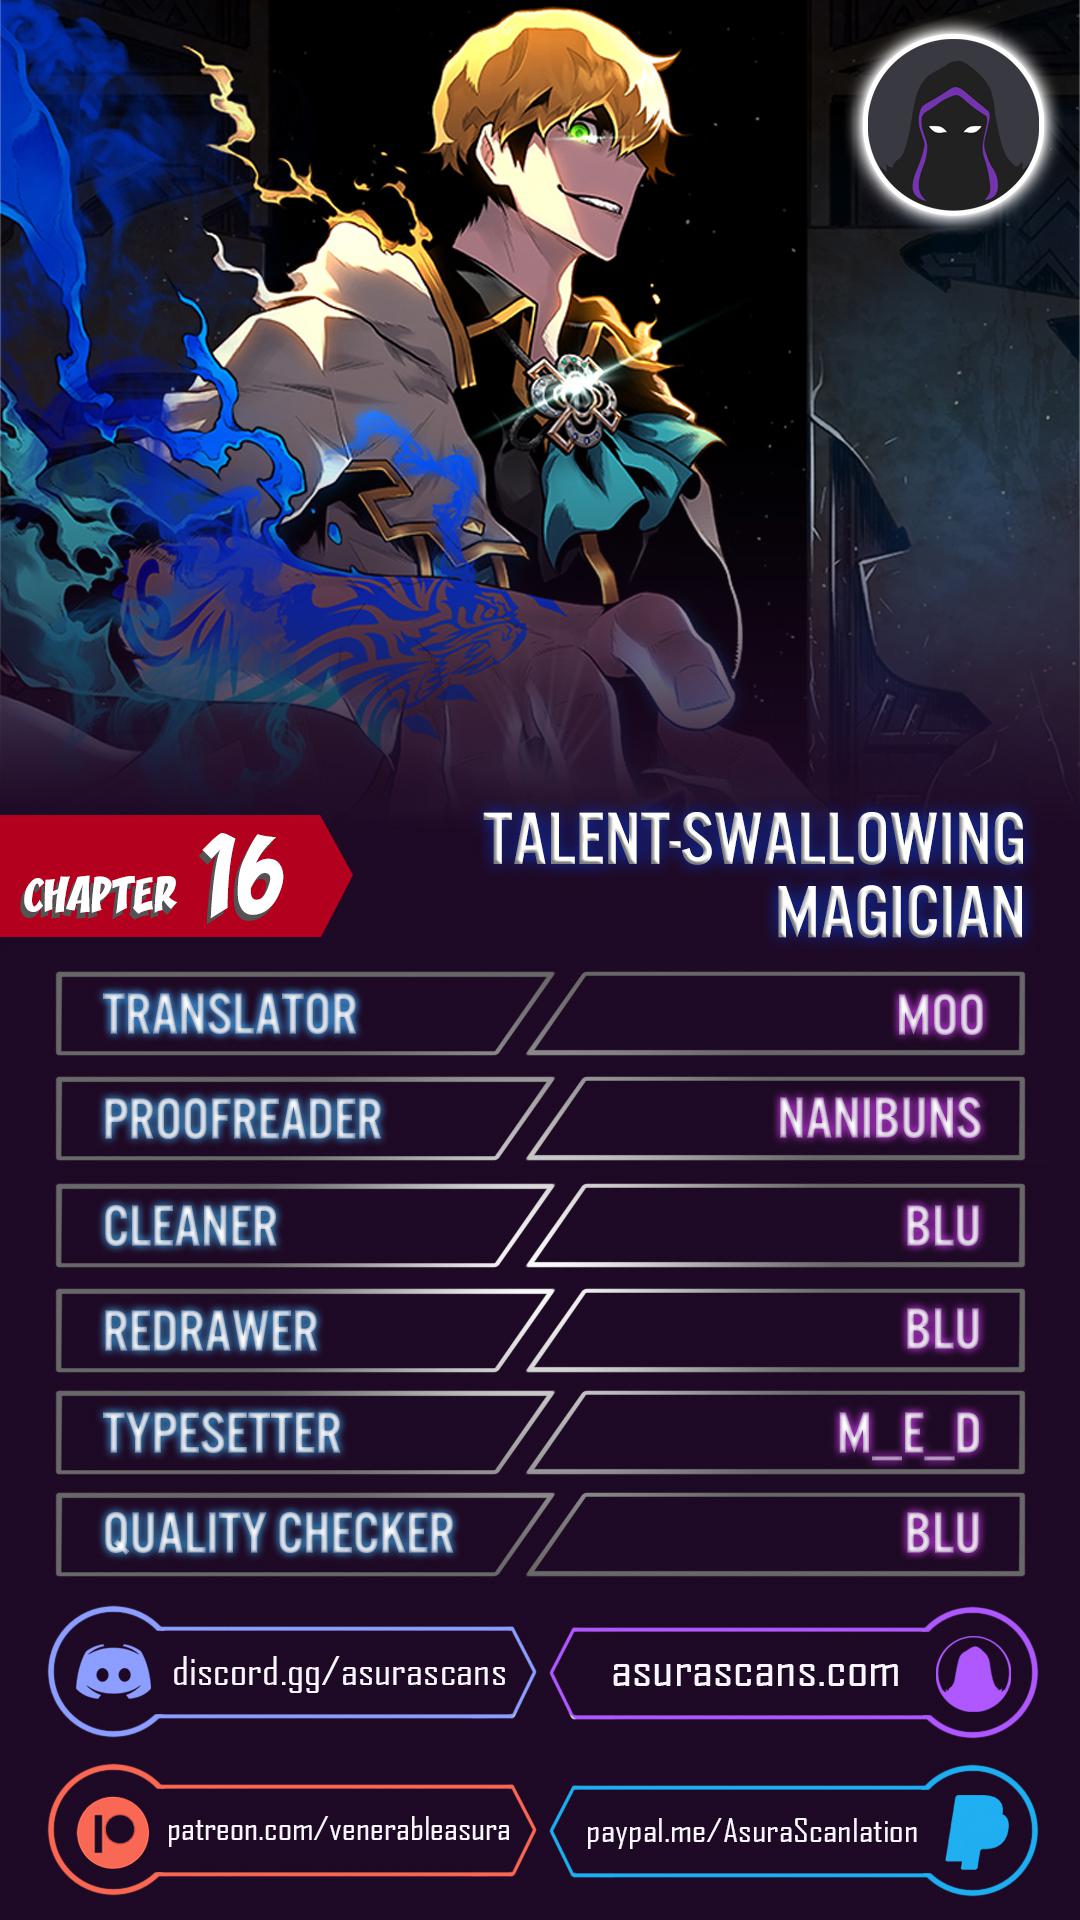 Talent-Swallowing Magician, Chapter 16 image 1